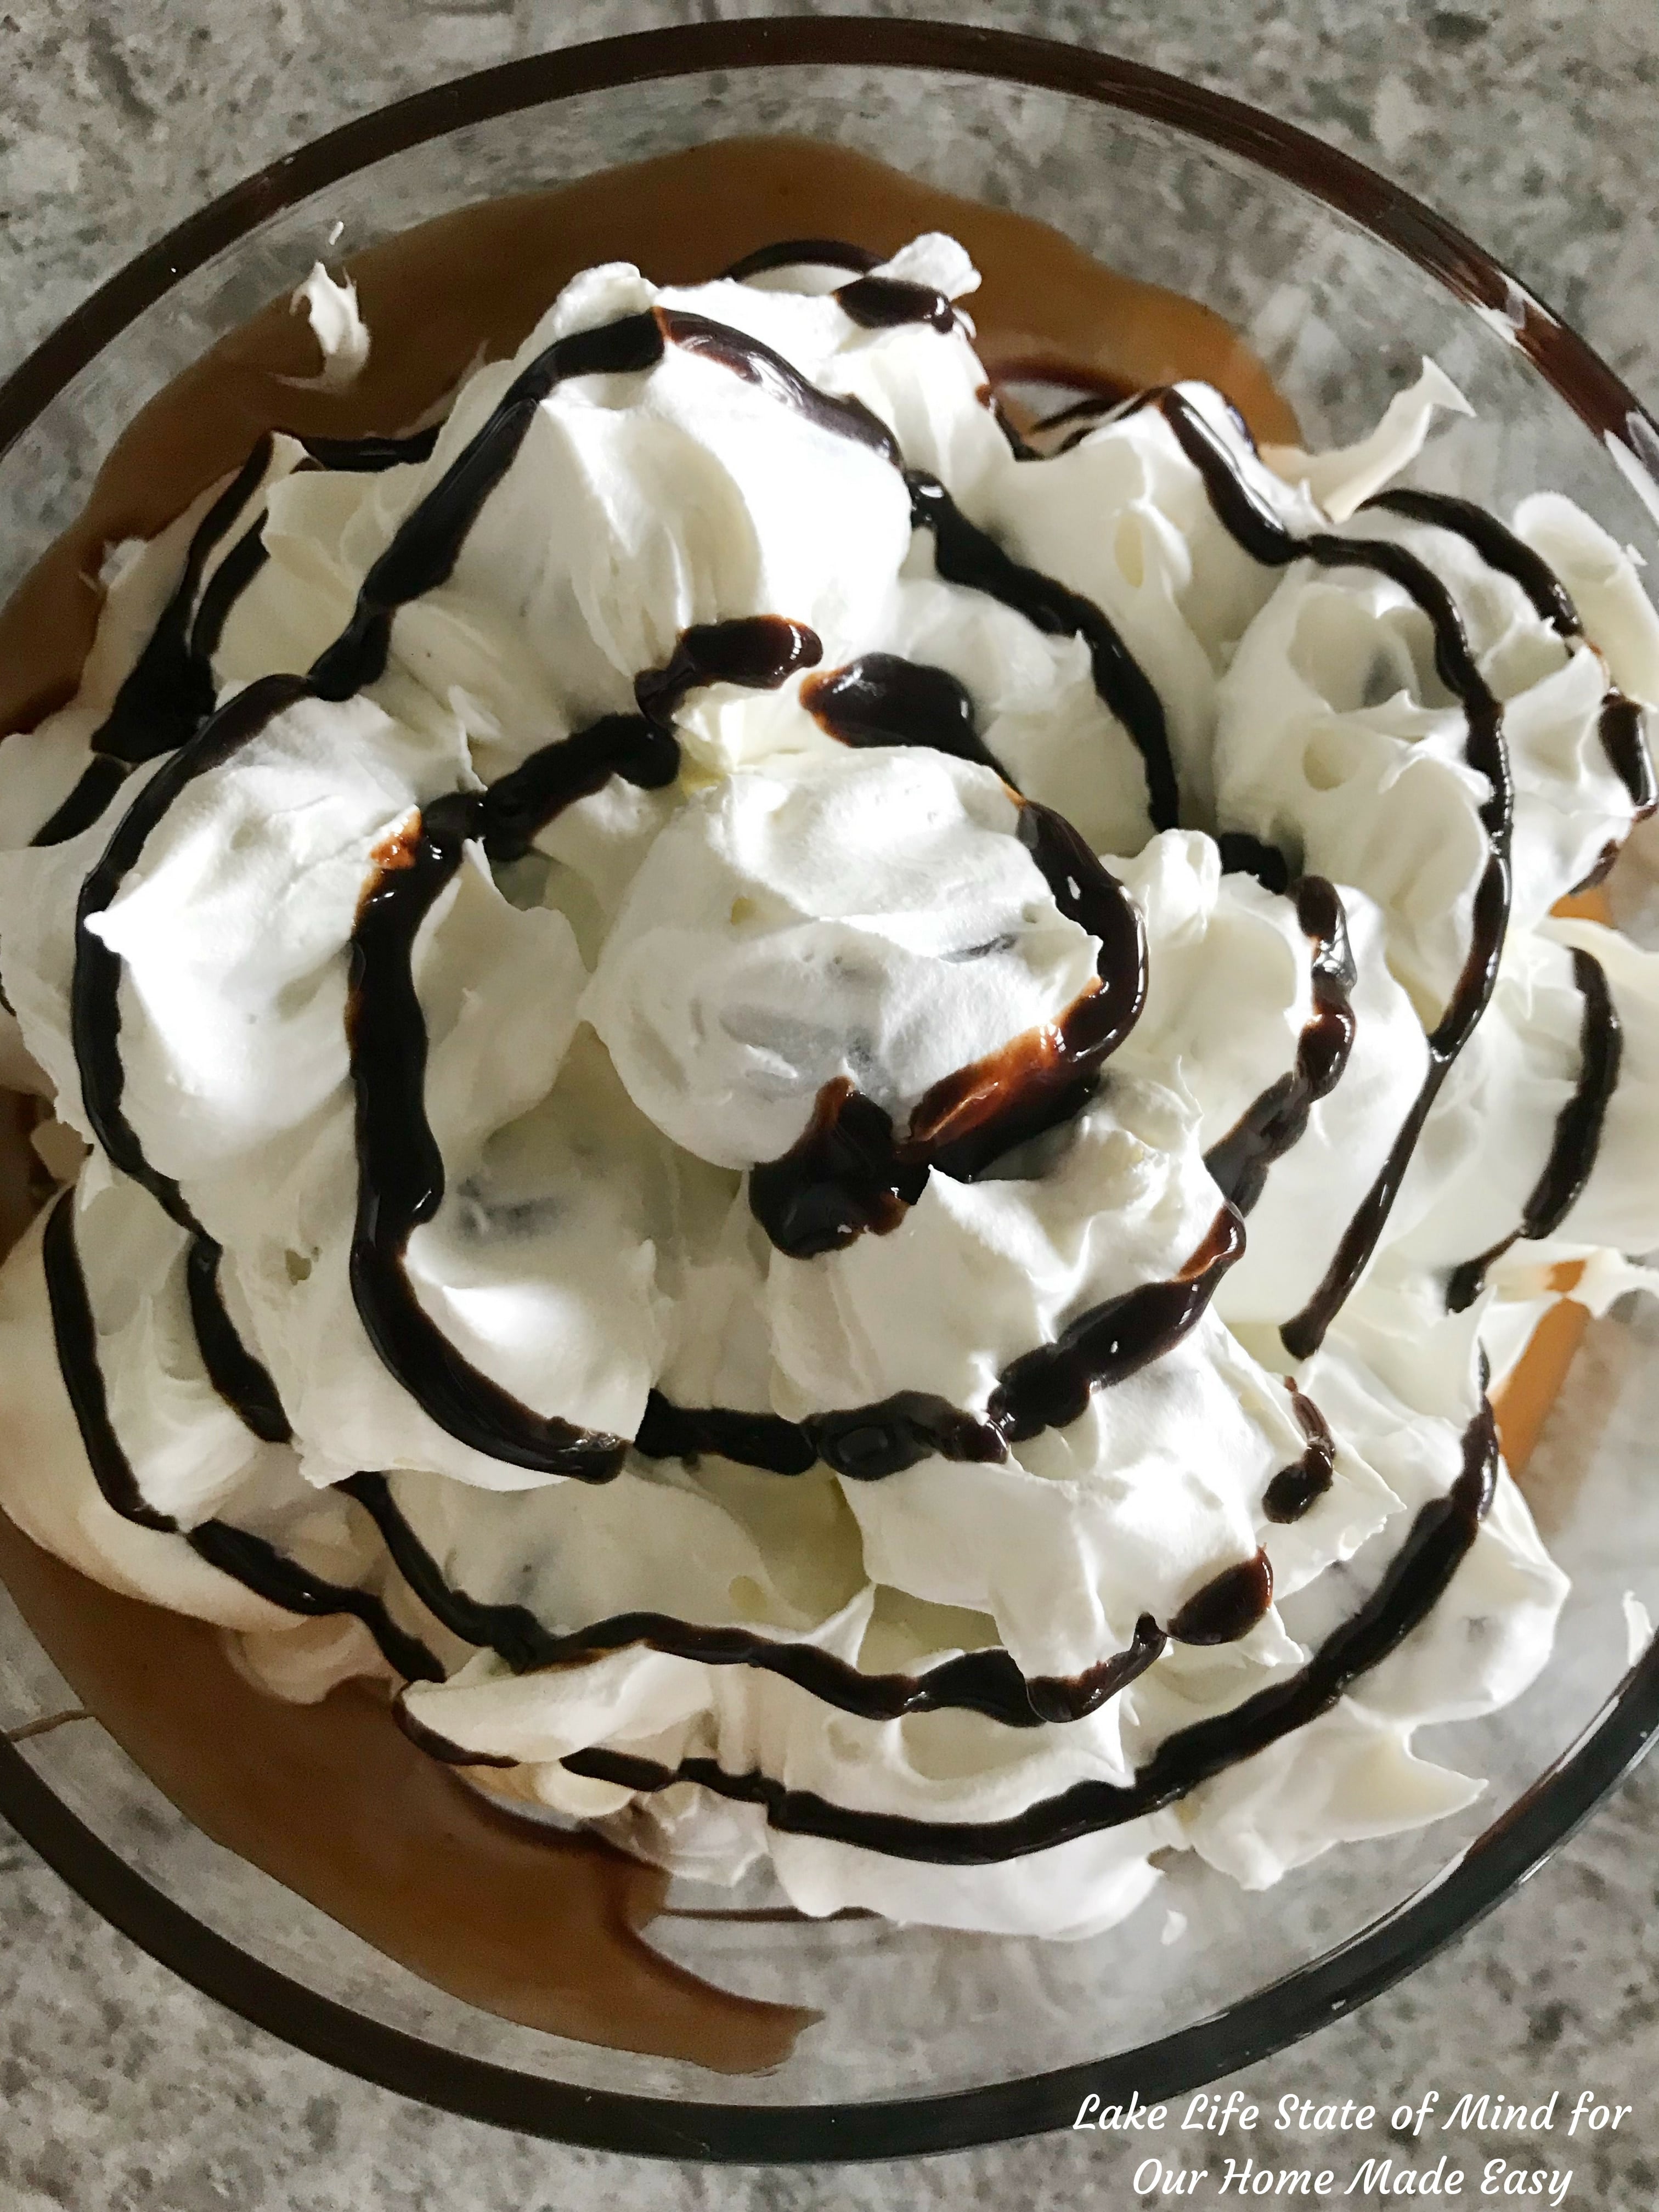 Decadent chocolate syrup drizzled over whipped cream covered cream puffs